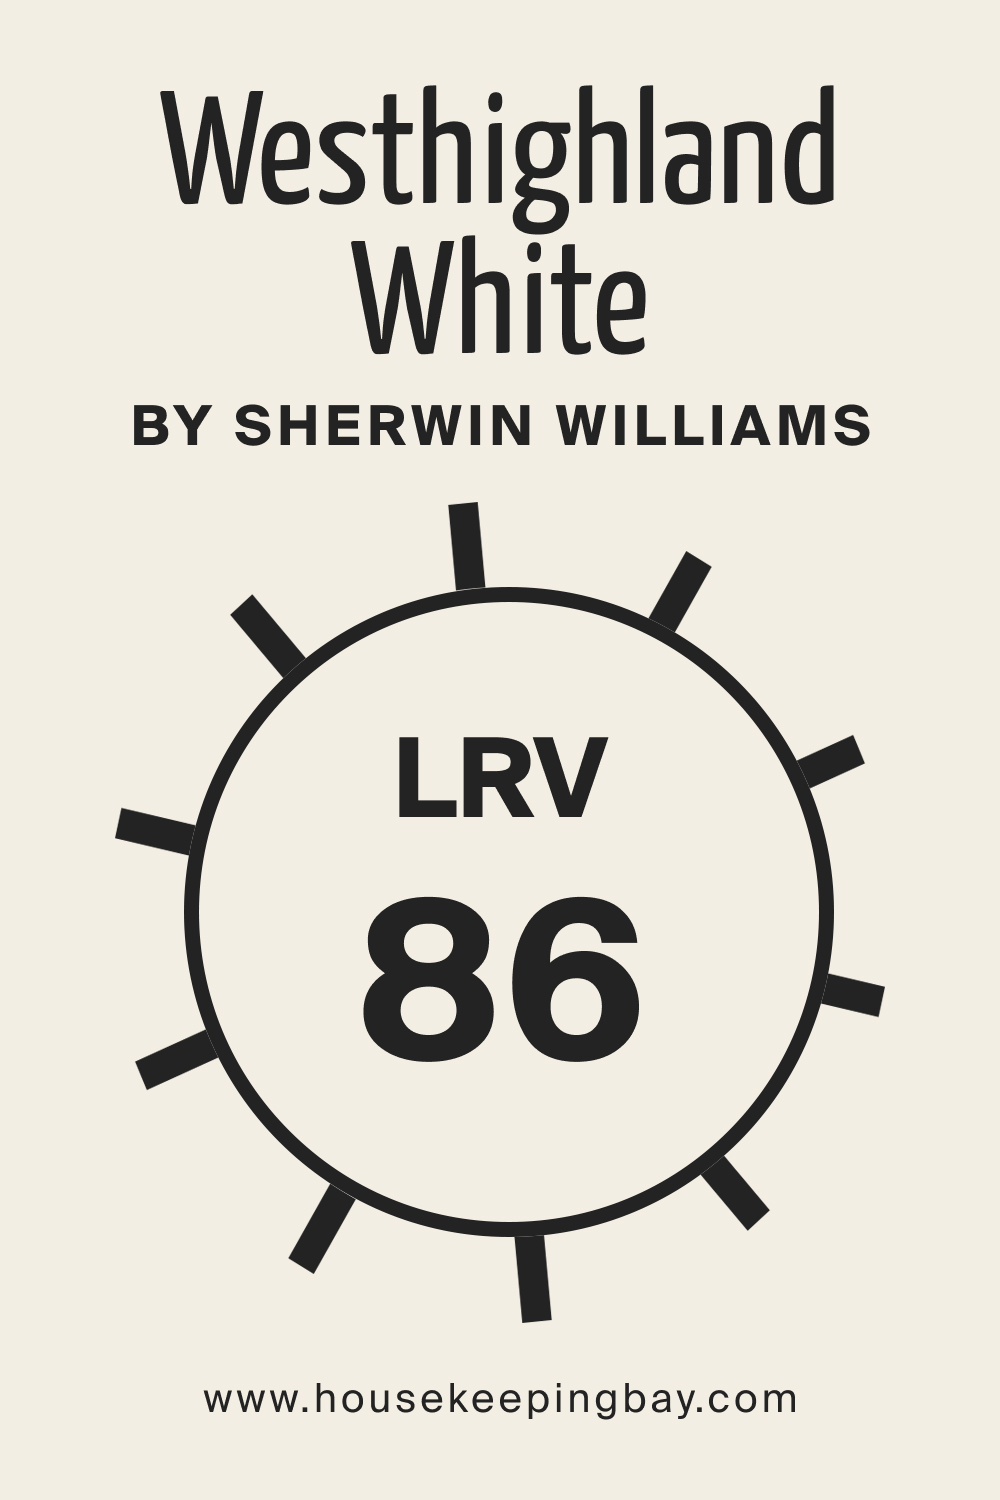 Westhighland White SW 7566 by Sherwin Williams. LRV 86